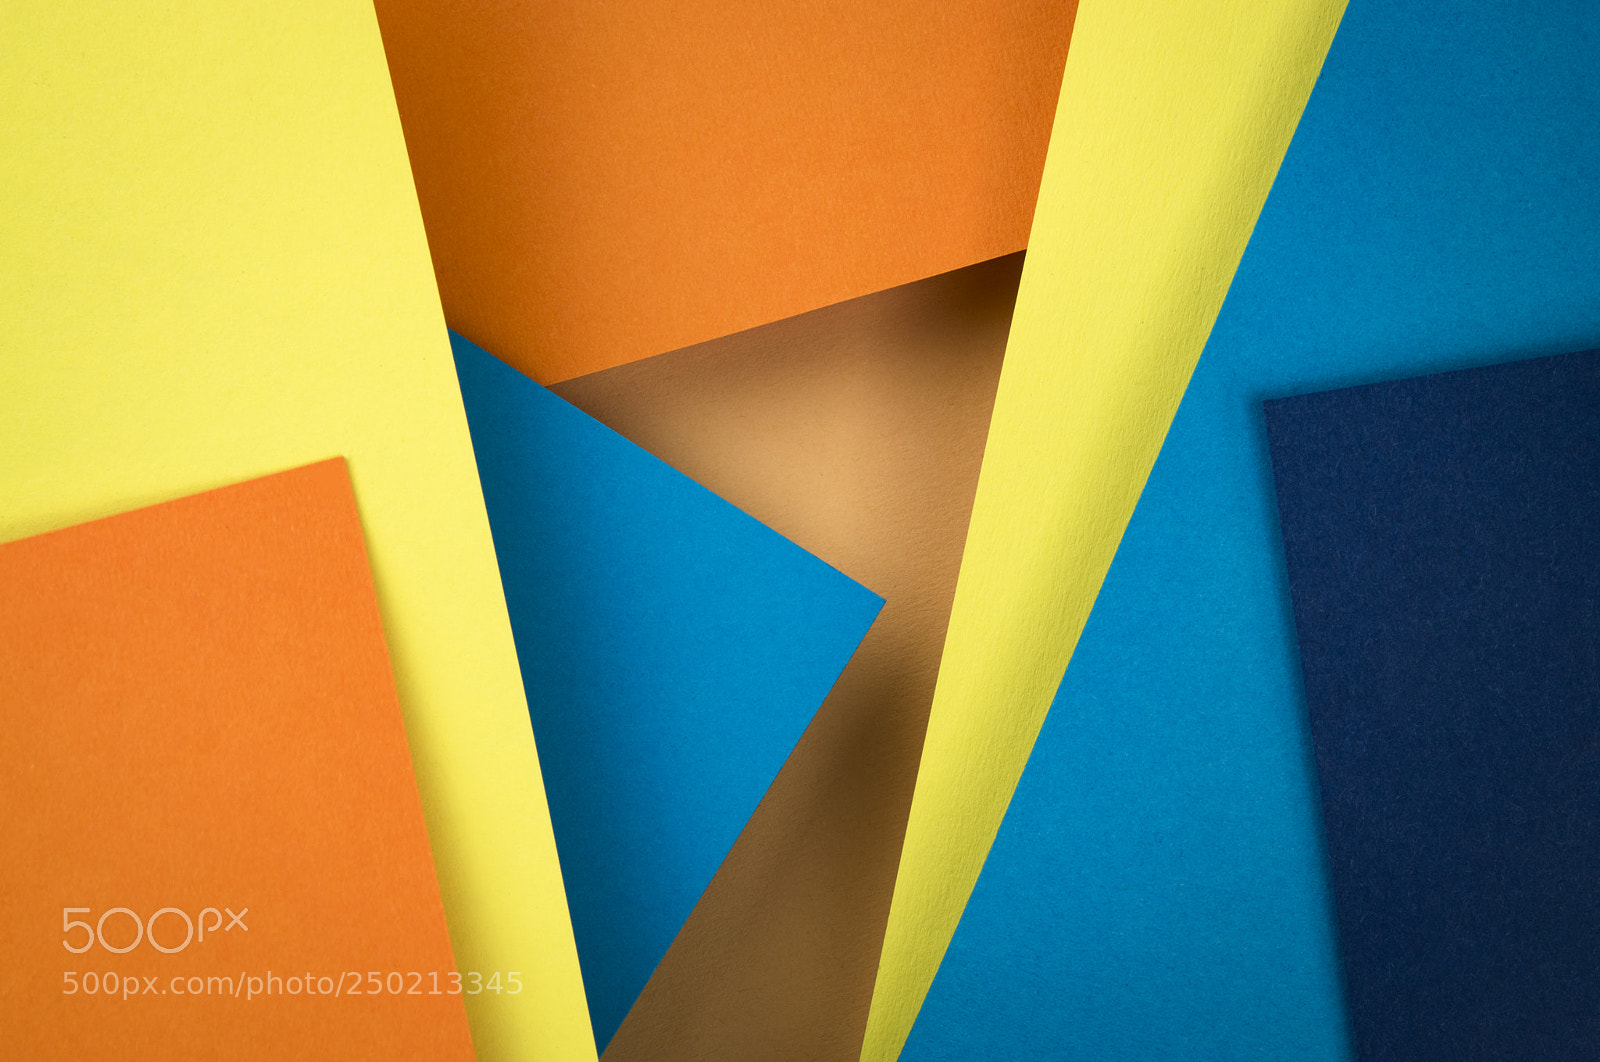 Nikon D5500 sample photo. Abstract composition of blue photography